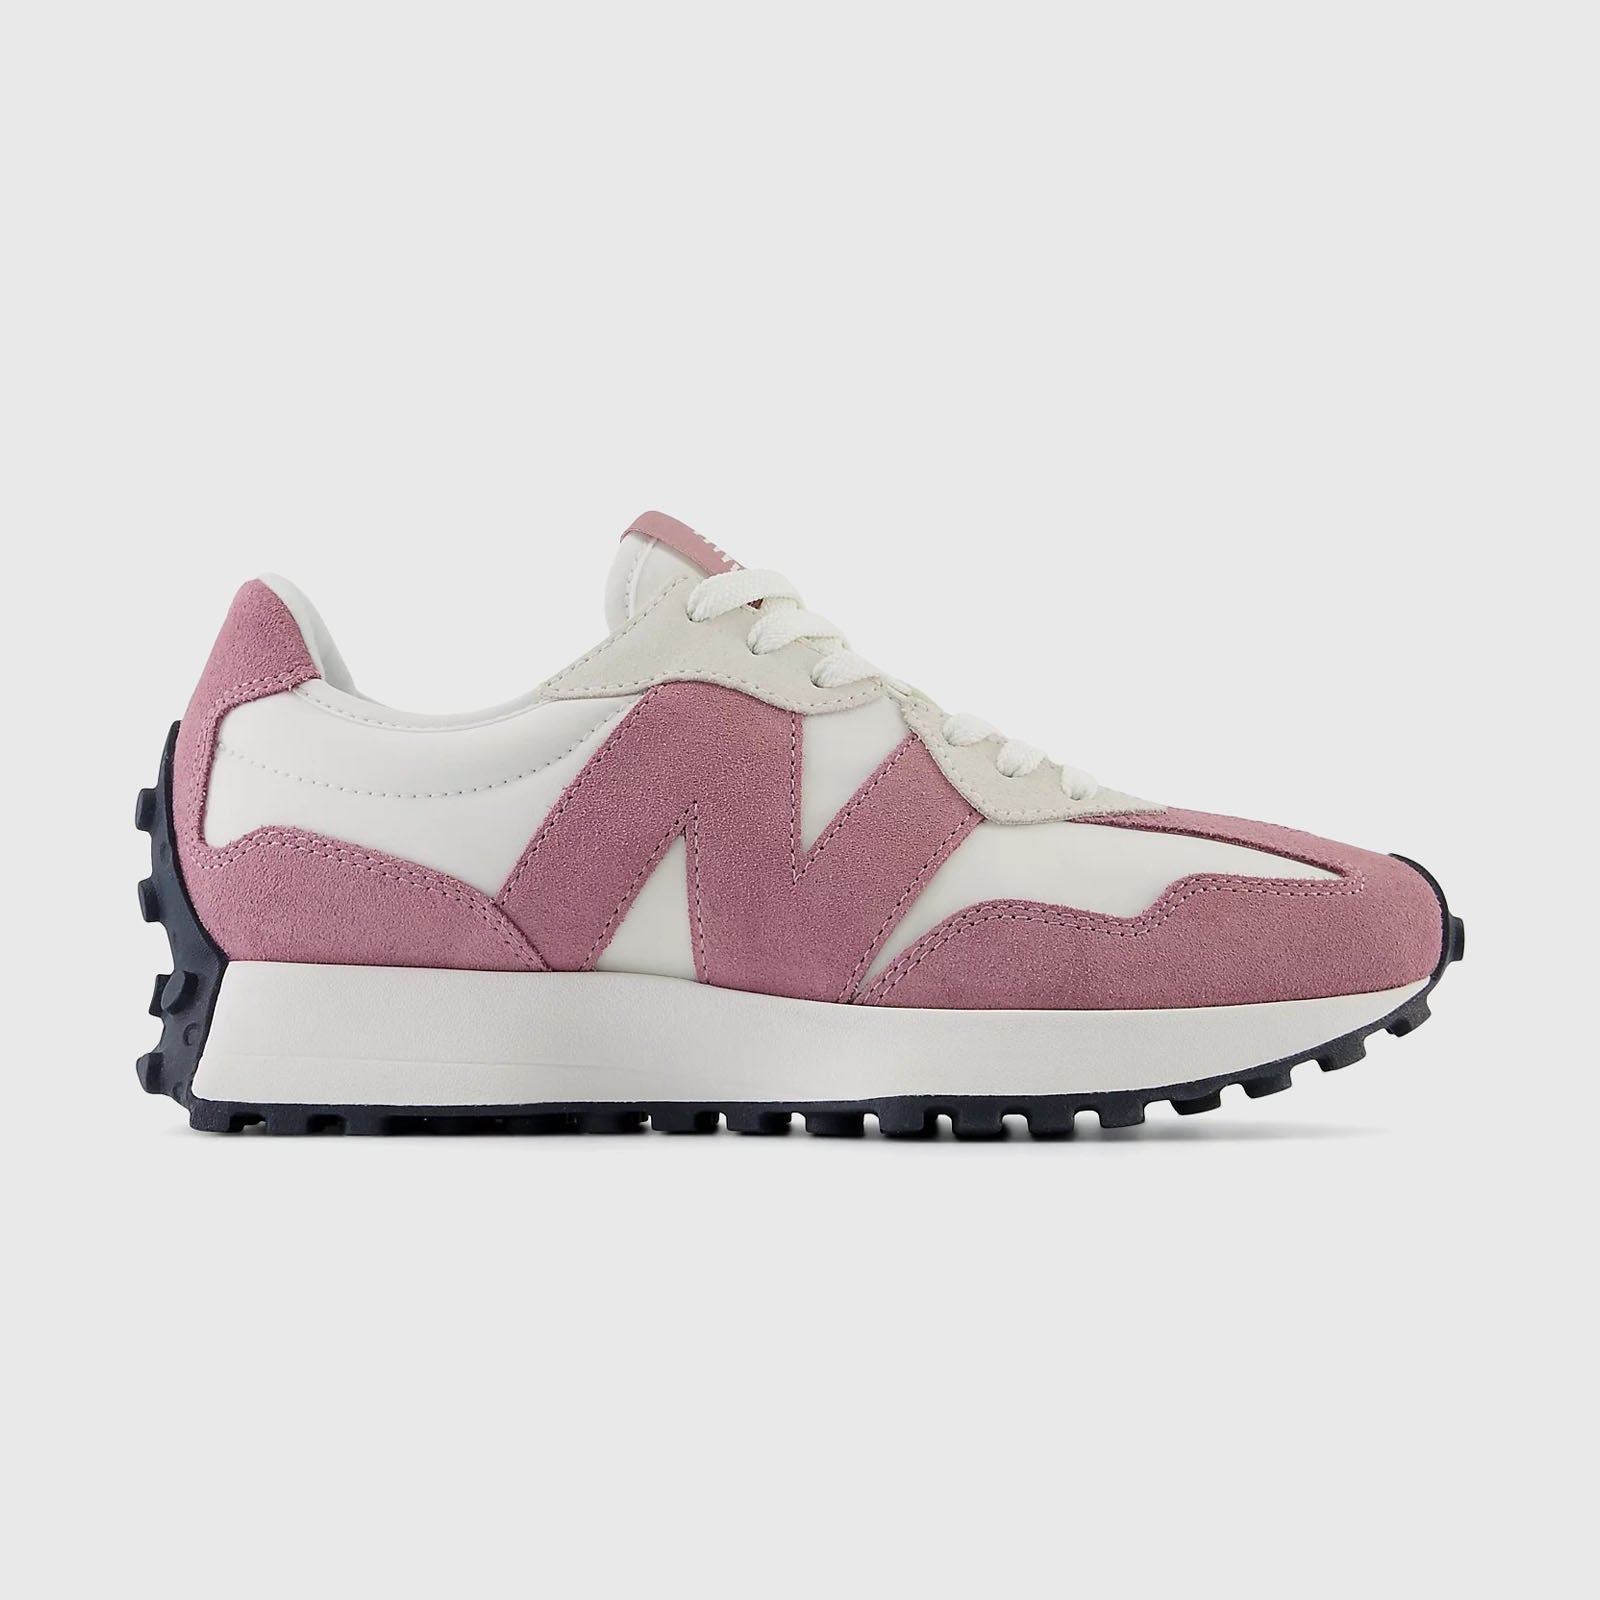 New Balance Sneaker 327 Synthetic Dusty Pink - 6